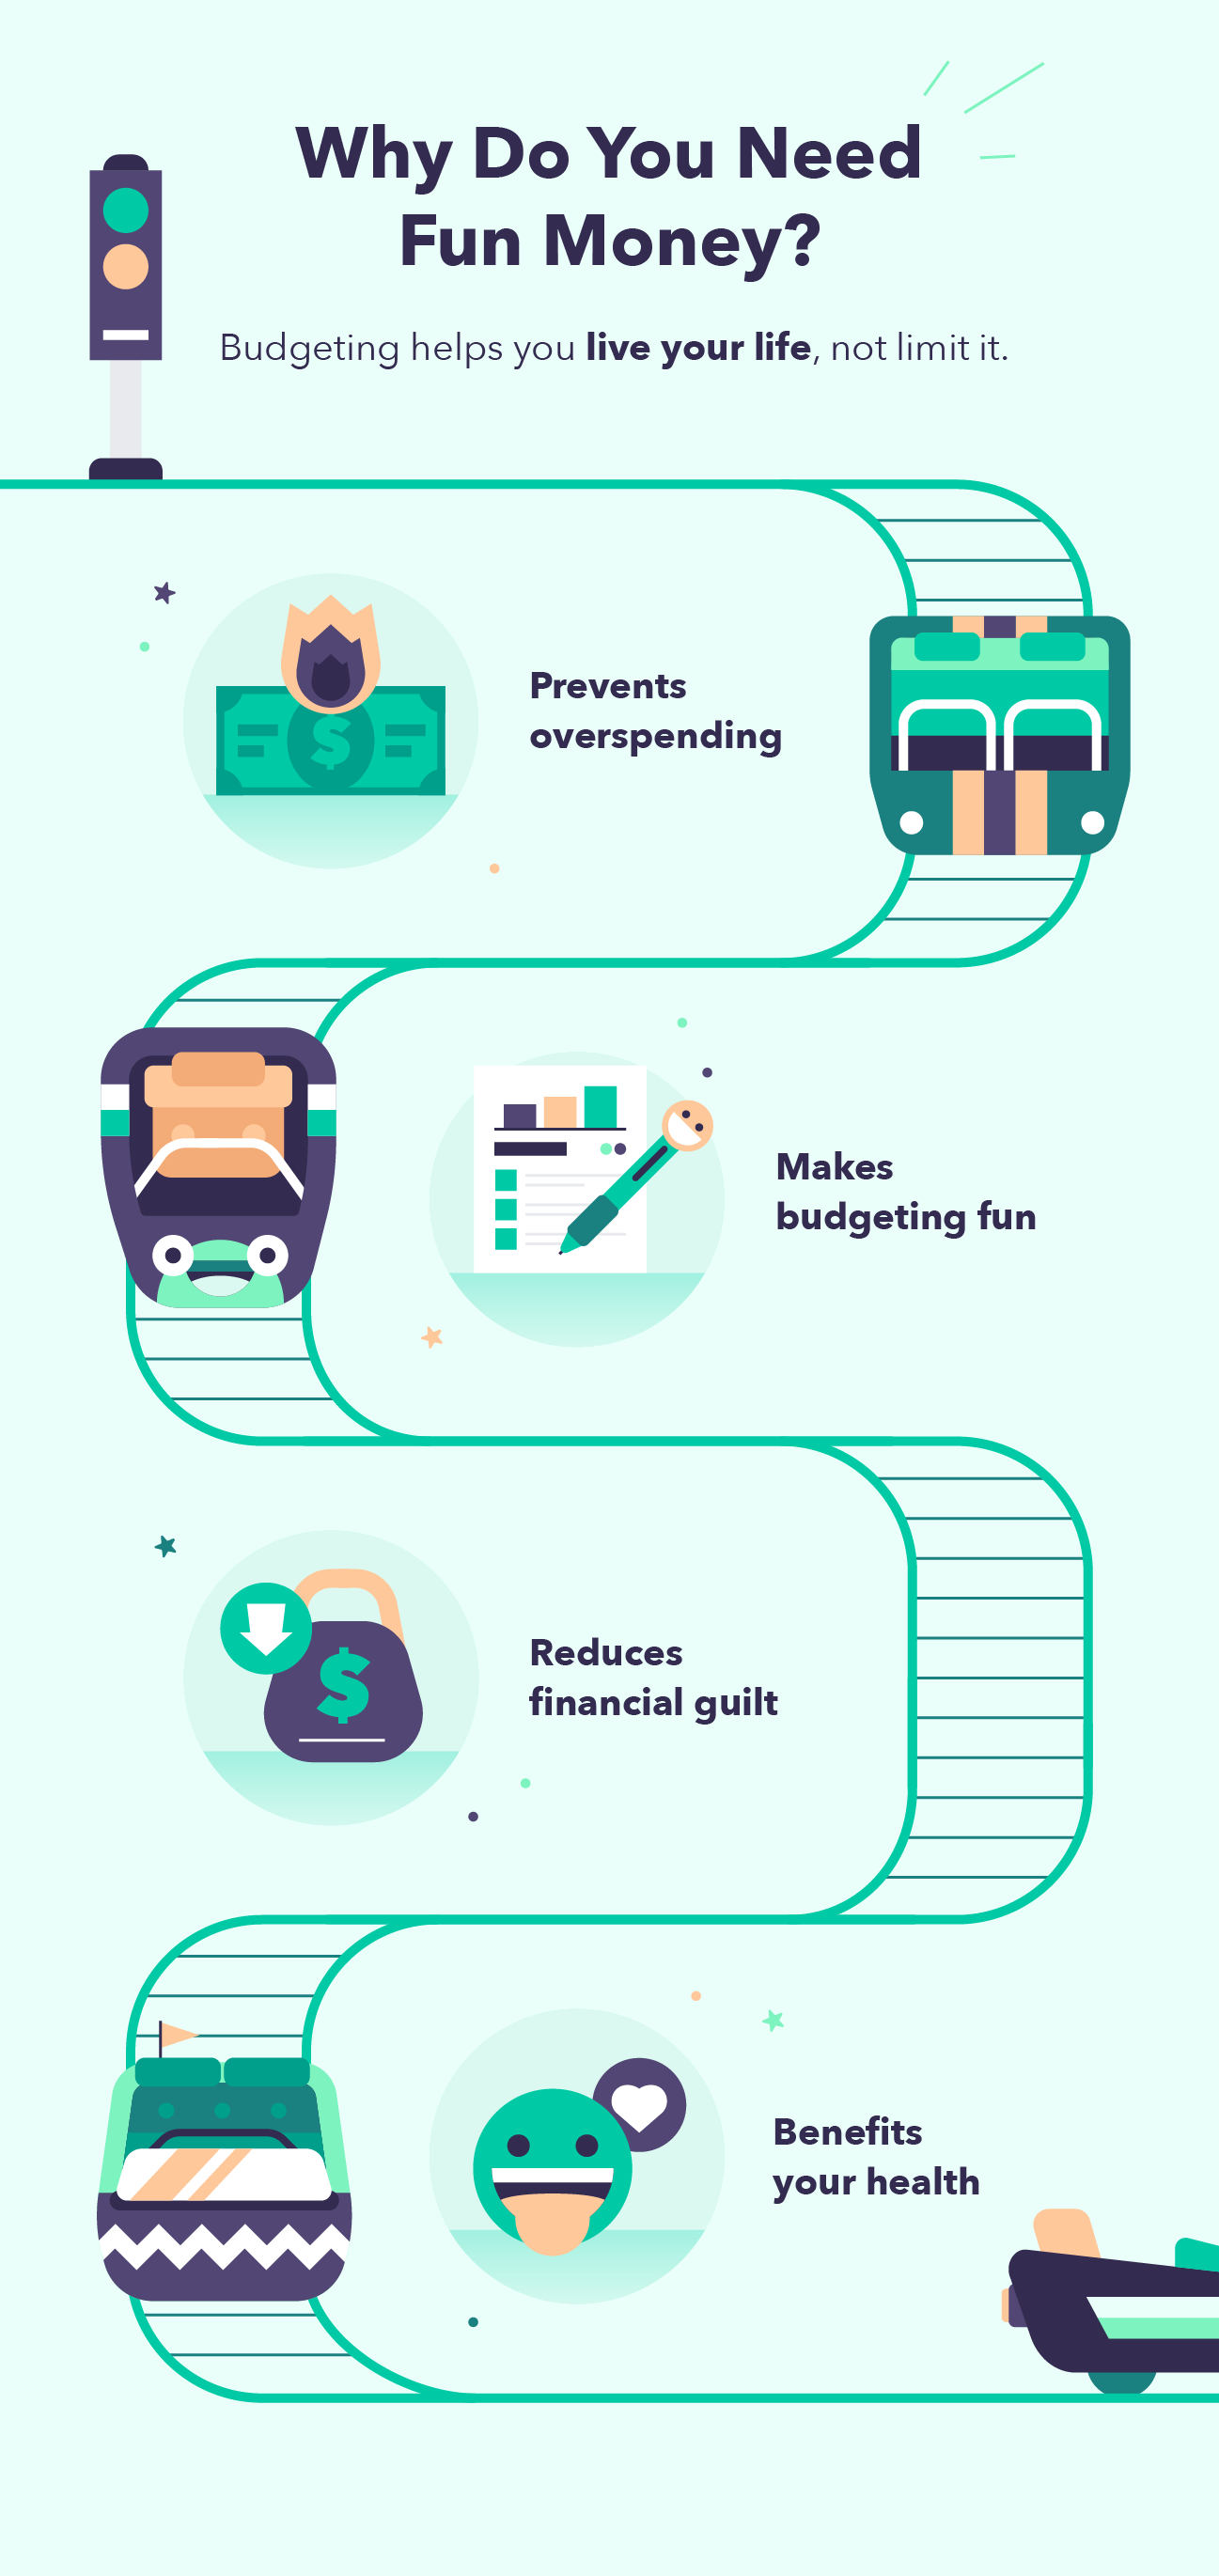 A graphic underscores why one needs fun money: Fun money prevents overspending, makes budgeting fun, reduces financial guilt, and benefits your health.